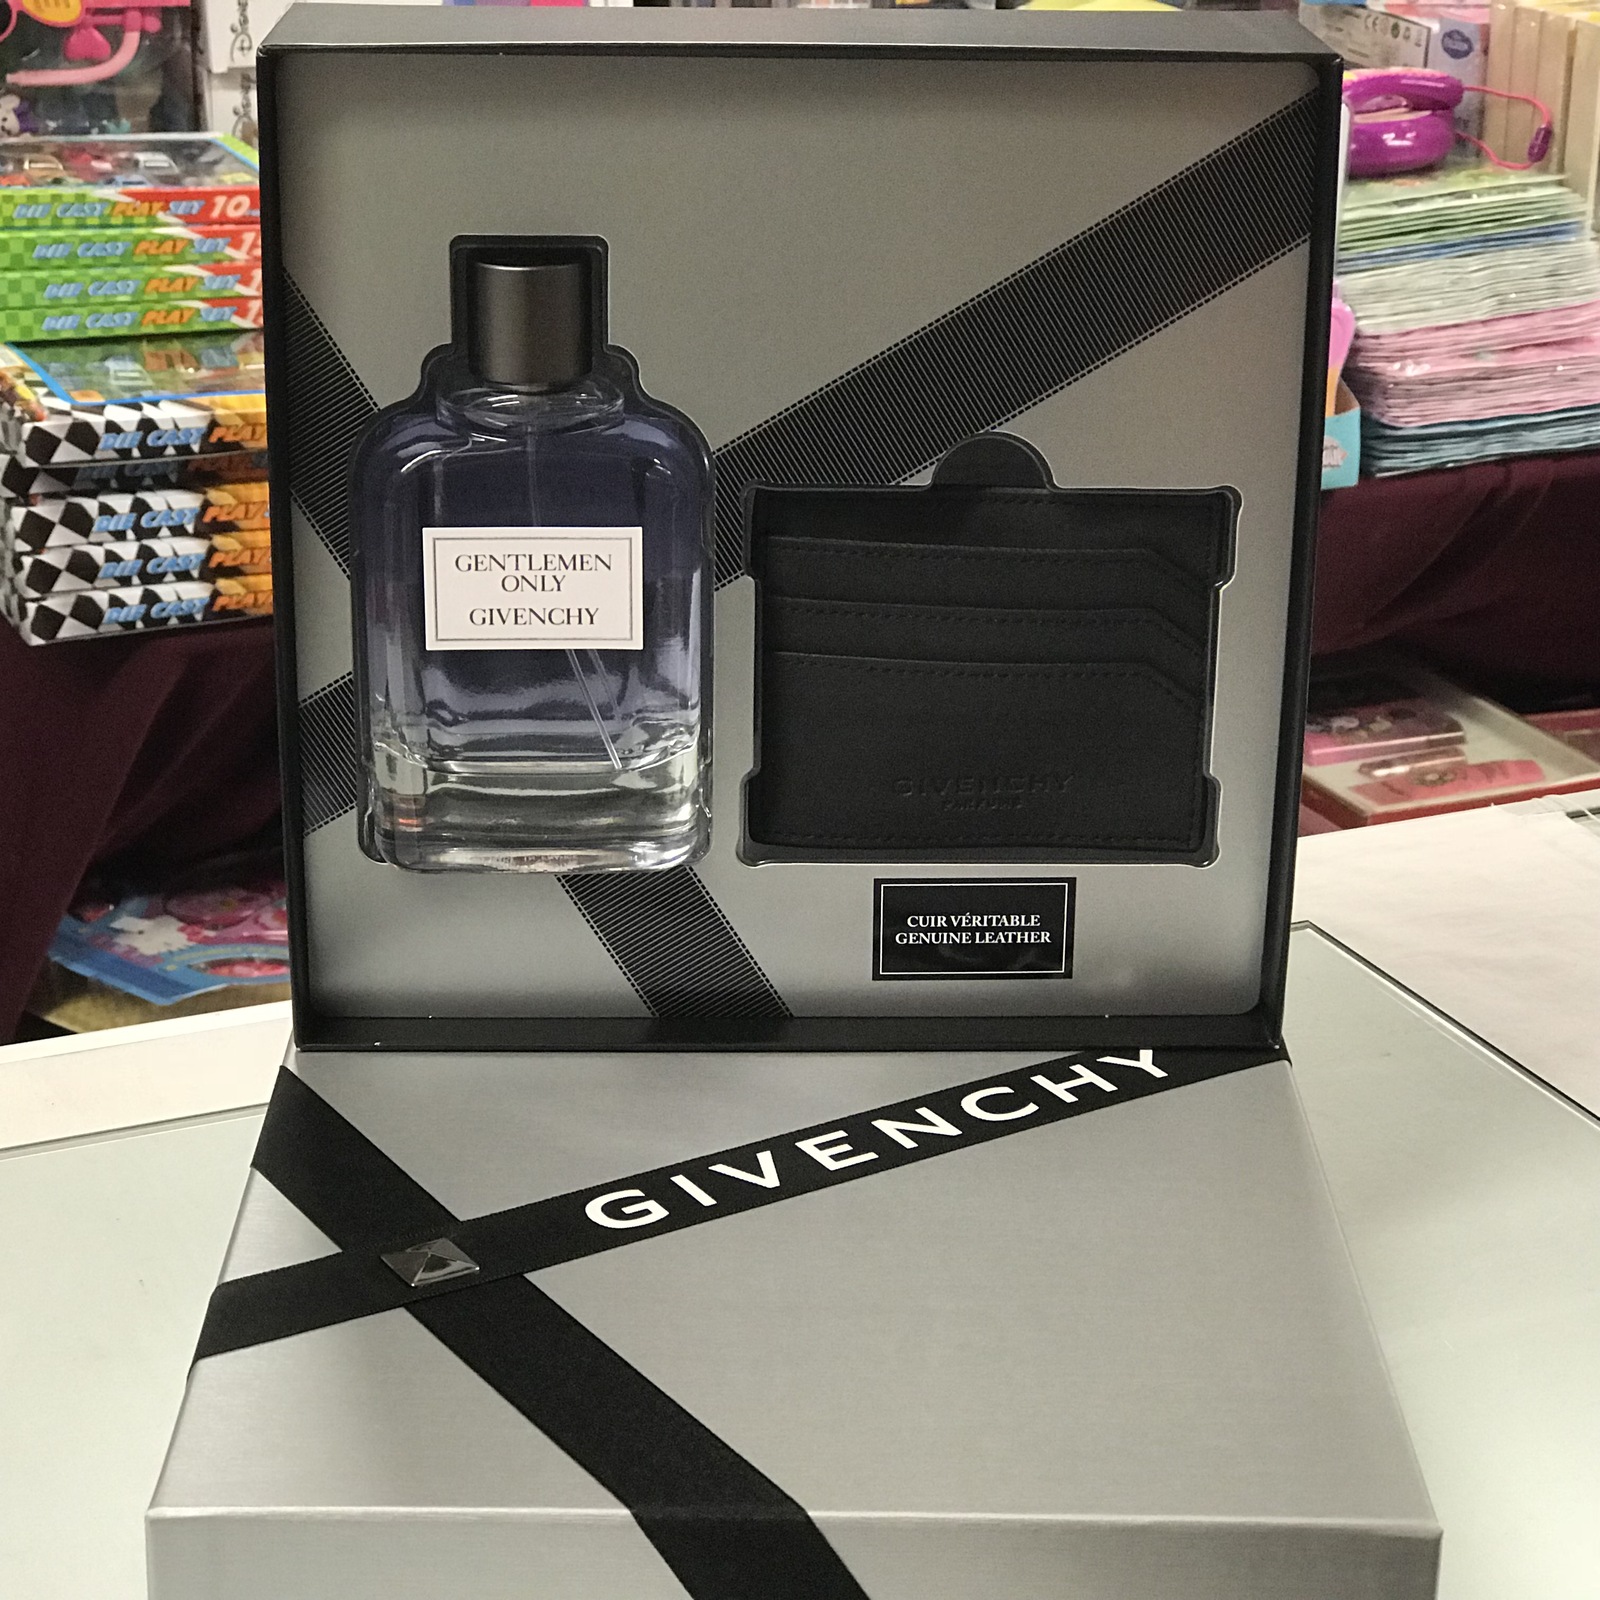 GIVENCHY GENTLEMEN ONLY by GIVENCHY 2-pcs MEN Set, 3.3 OZ + Leather Card Holder  - $123.00